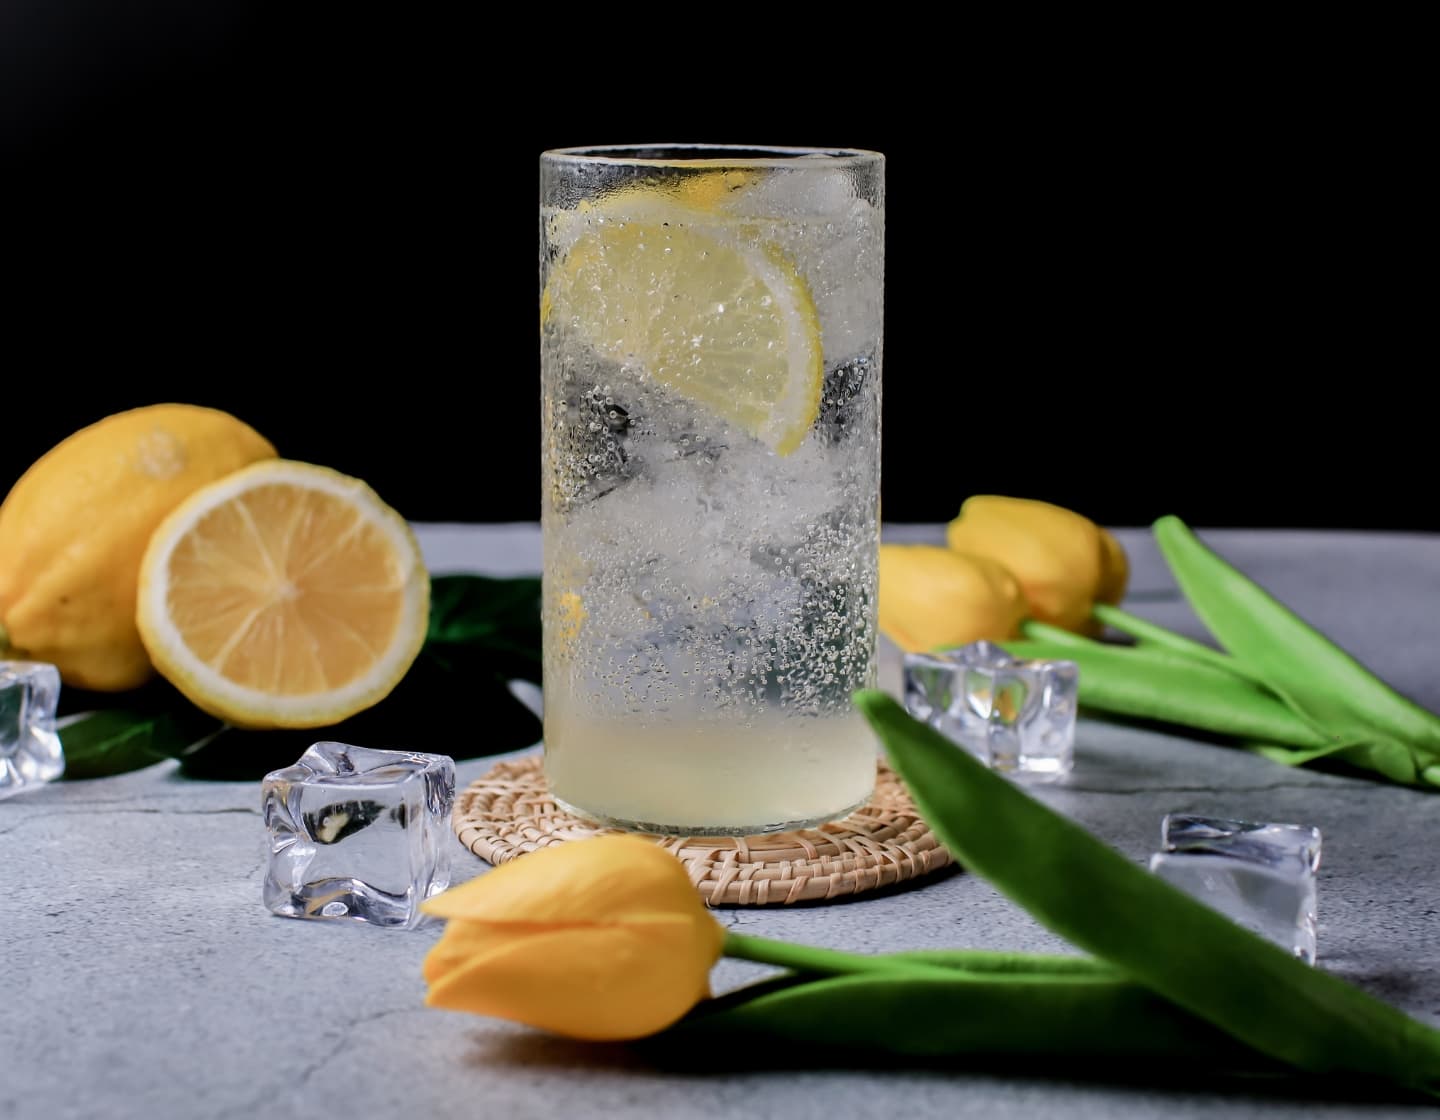 Cold drink in clear glass with sliced lemon and ice, placed on table with lemons ice and yellow flowers